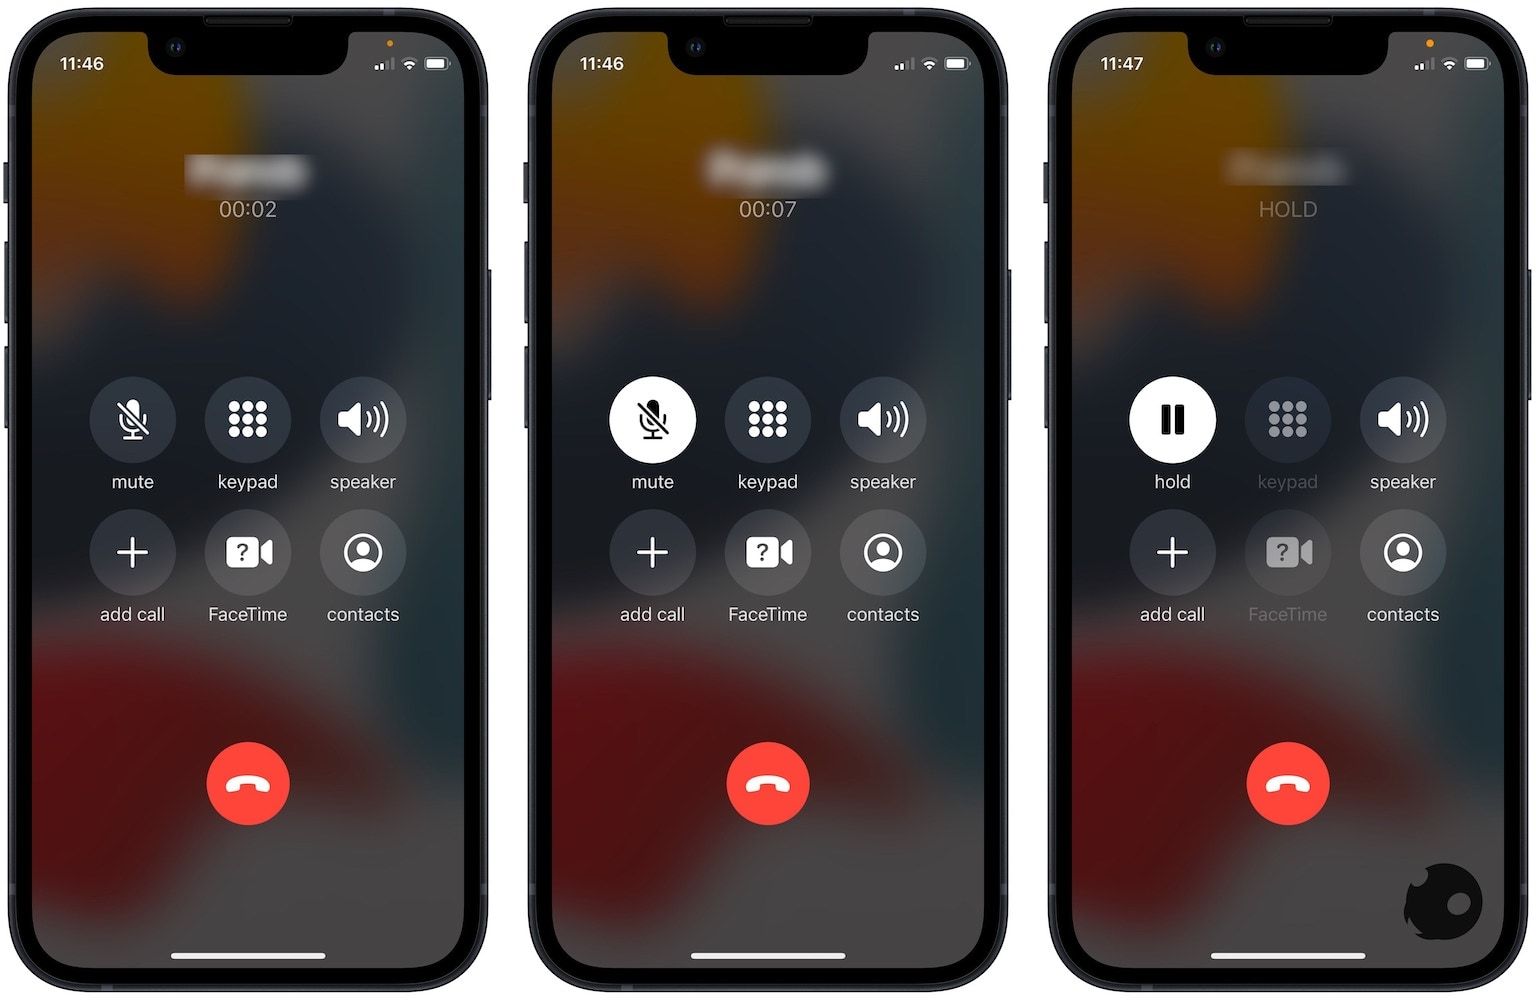 iPhone screenshot showing how to mute and hold a call